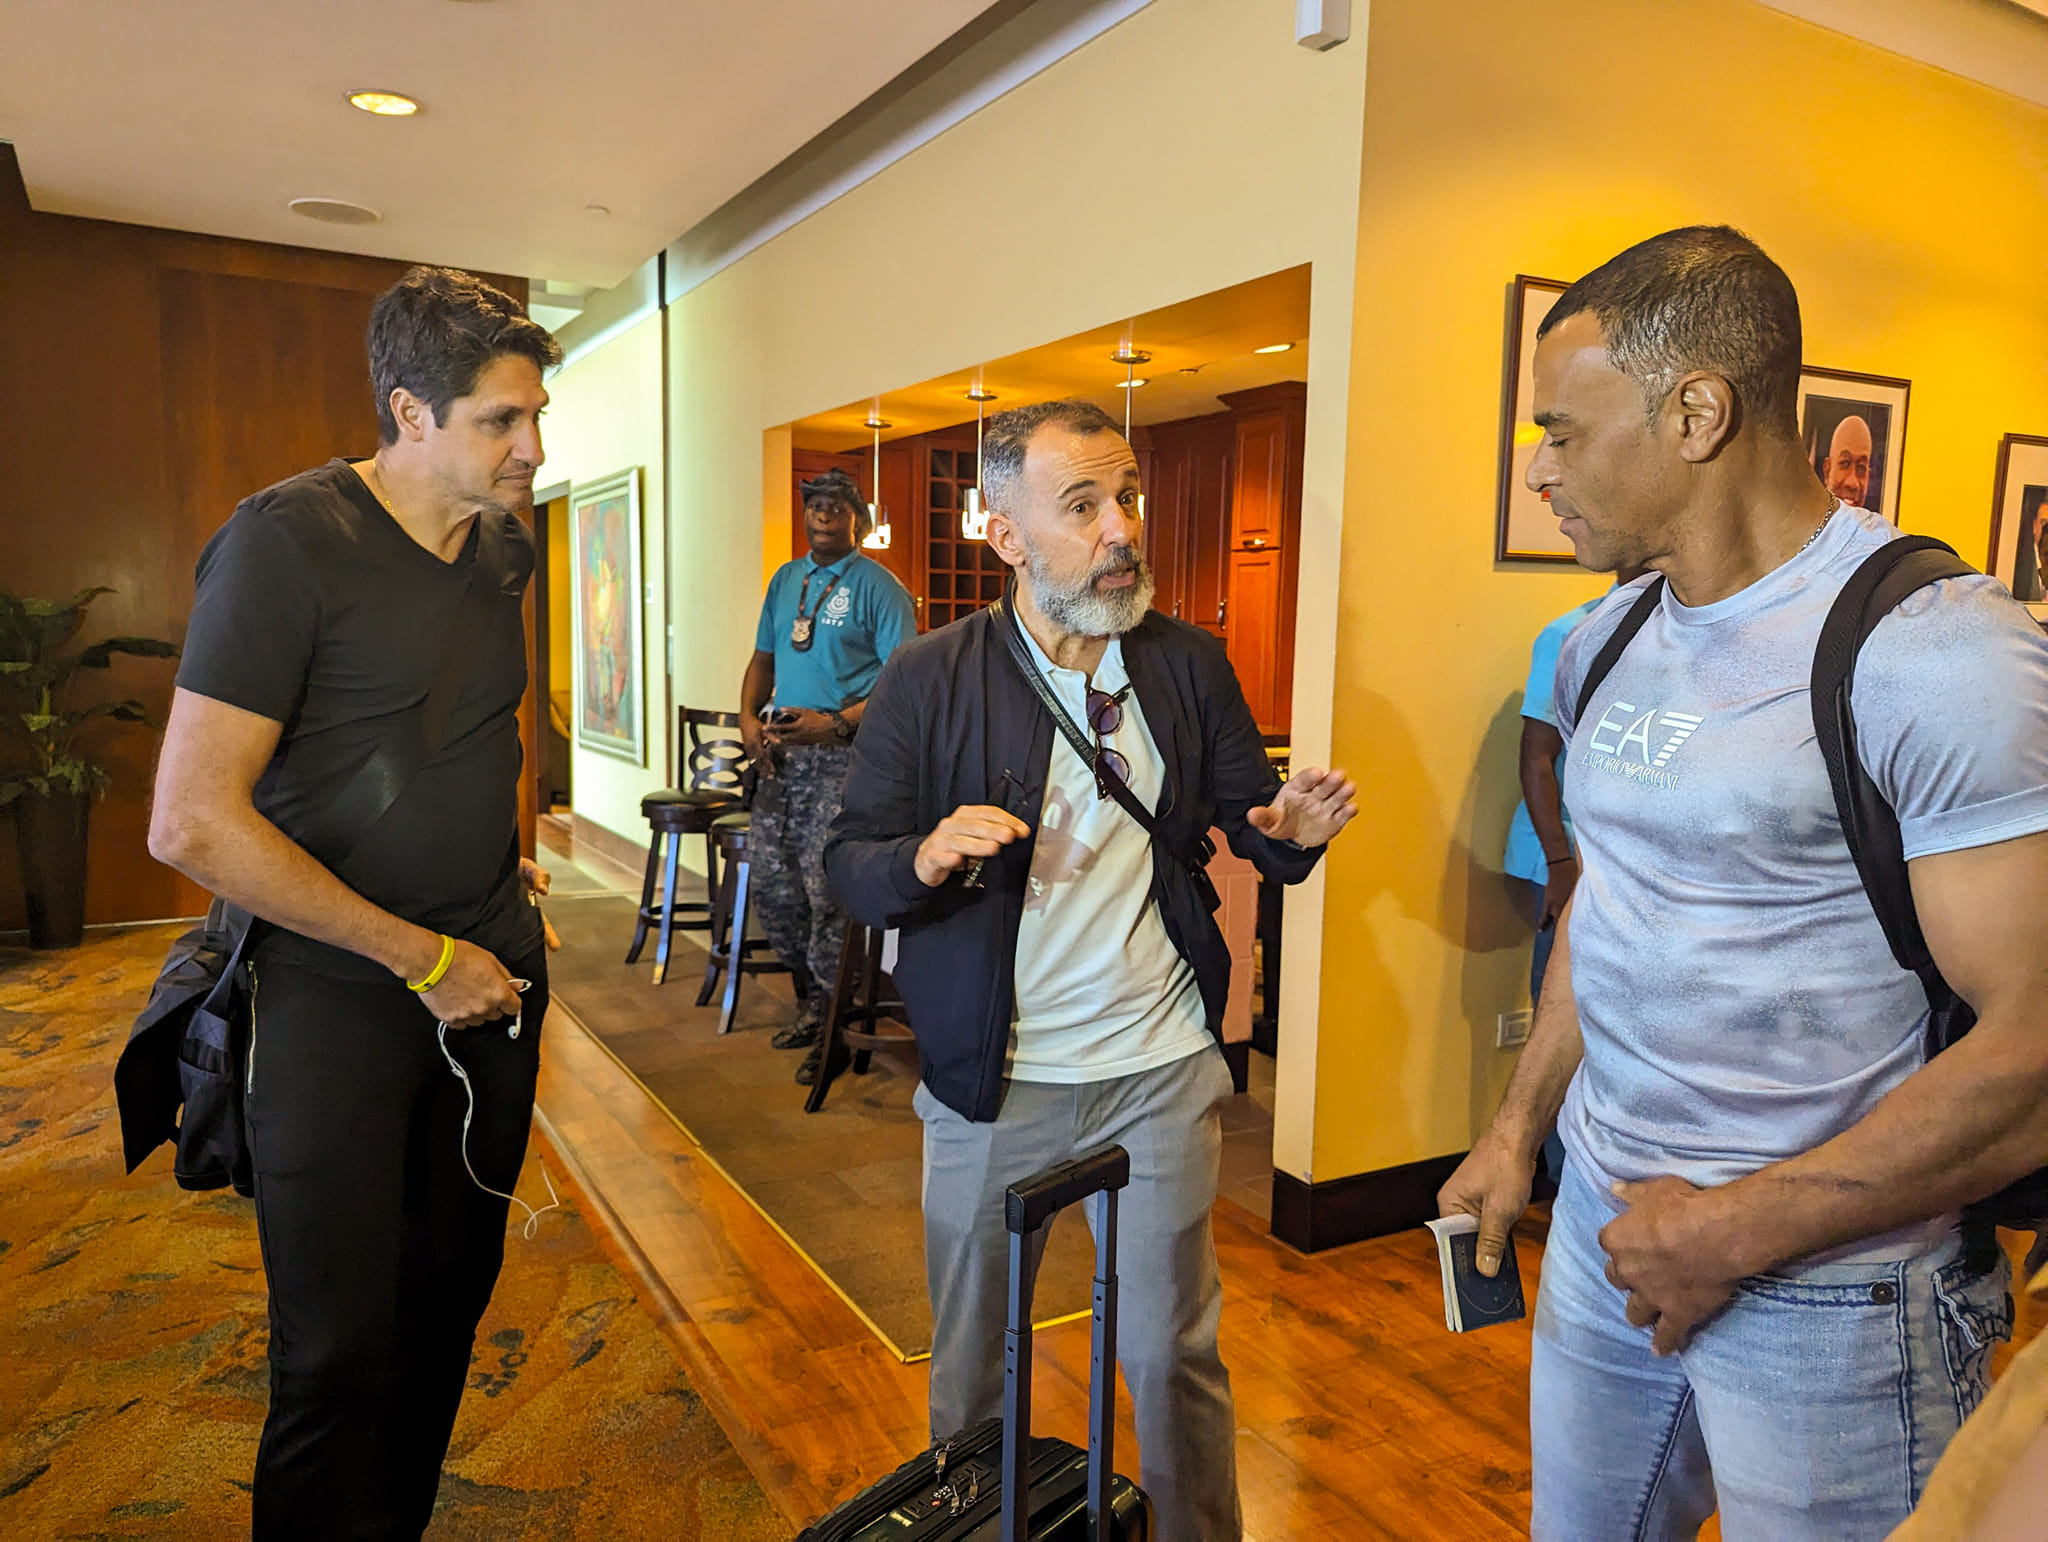 Former Brazil stars Edmilson (left) and Cafu (right) speak to an unidentified man at the VIP Lounge of the Piarco International Airport. (Photo credit - TTFA Media)